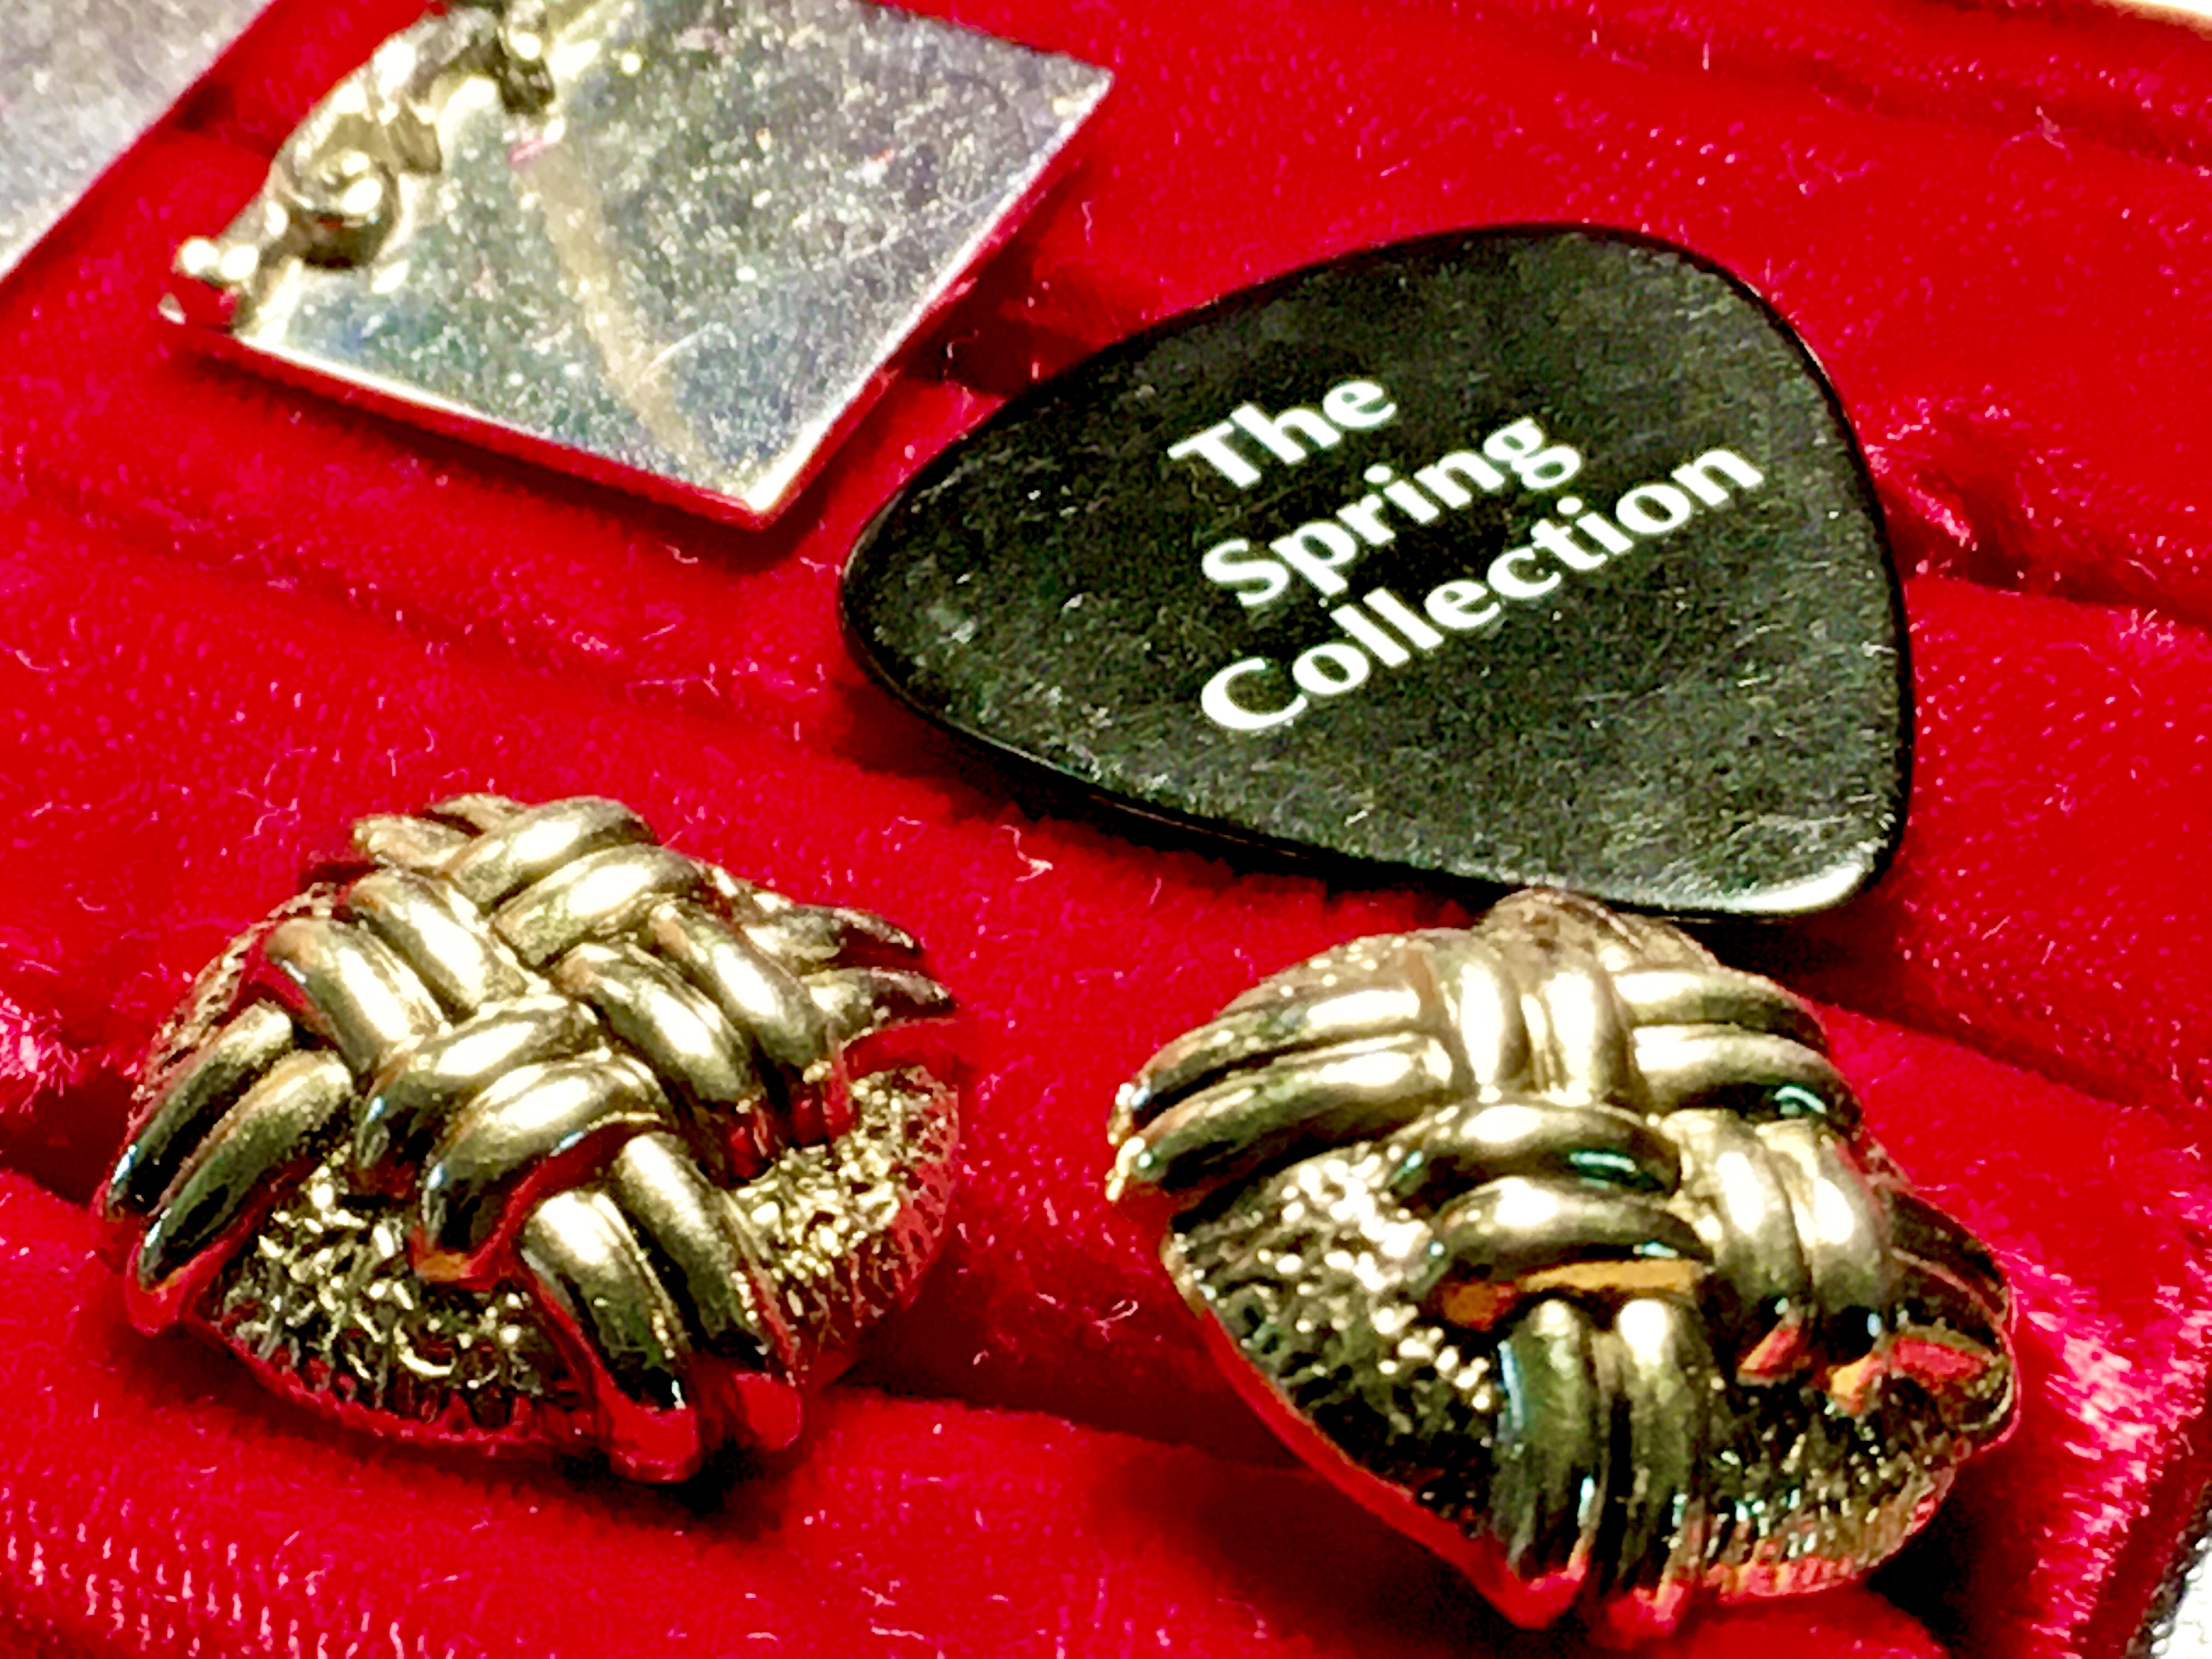 The Spring Collection had plectrums made to promote the band.